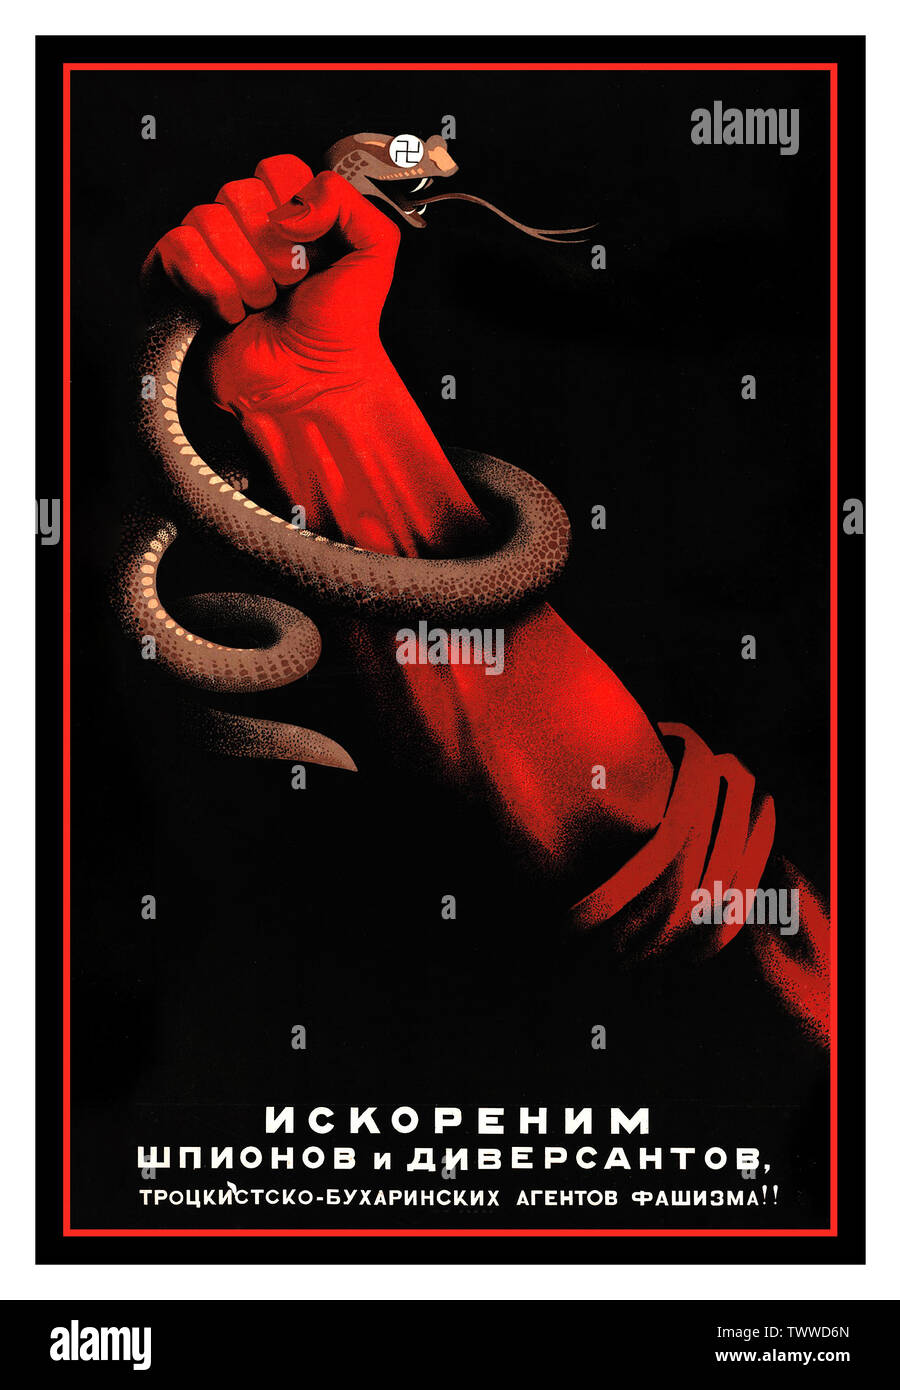 Vintage pre WW2 Soviet Russian Propaganda Poster “Eliminate the spies and saboteurs, Trotsky-Bukharin agents of fascism! “ Hand holding a serpent with swastika eyes..  Moscow: Leningrad Art, 1937. - Color Lithography USSR Stock Photo